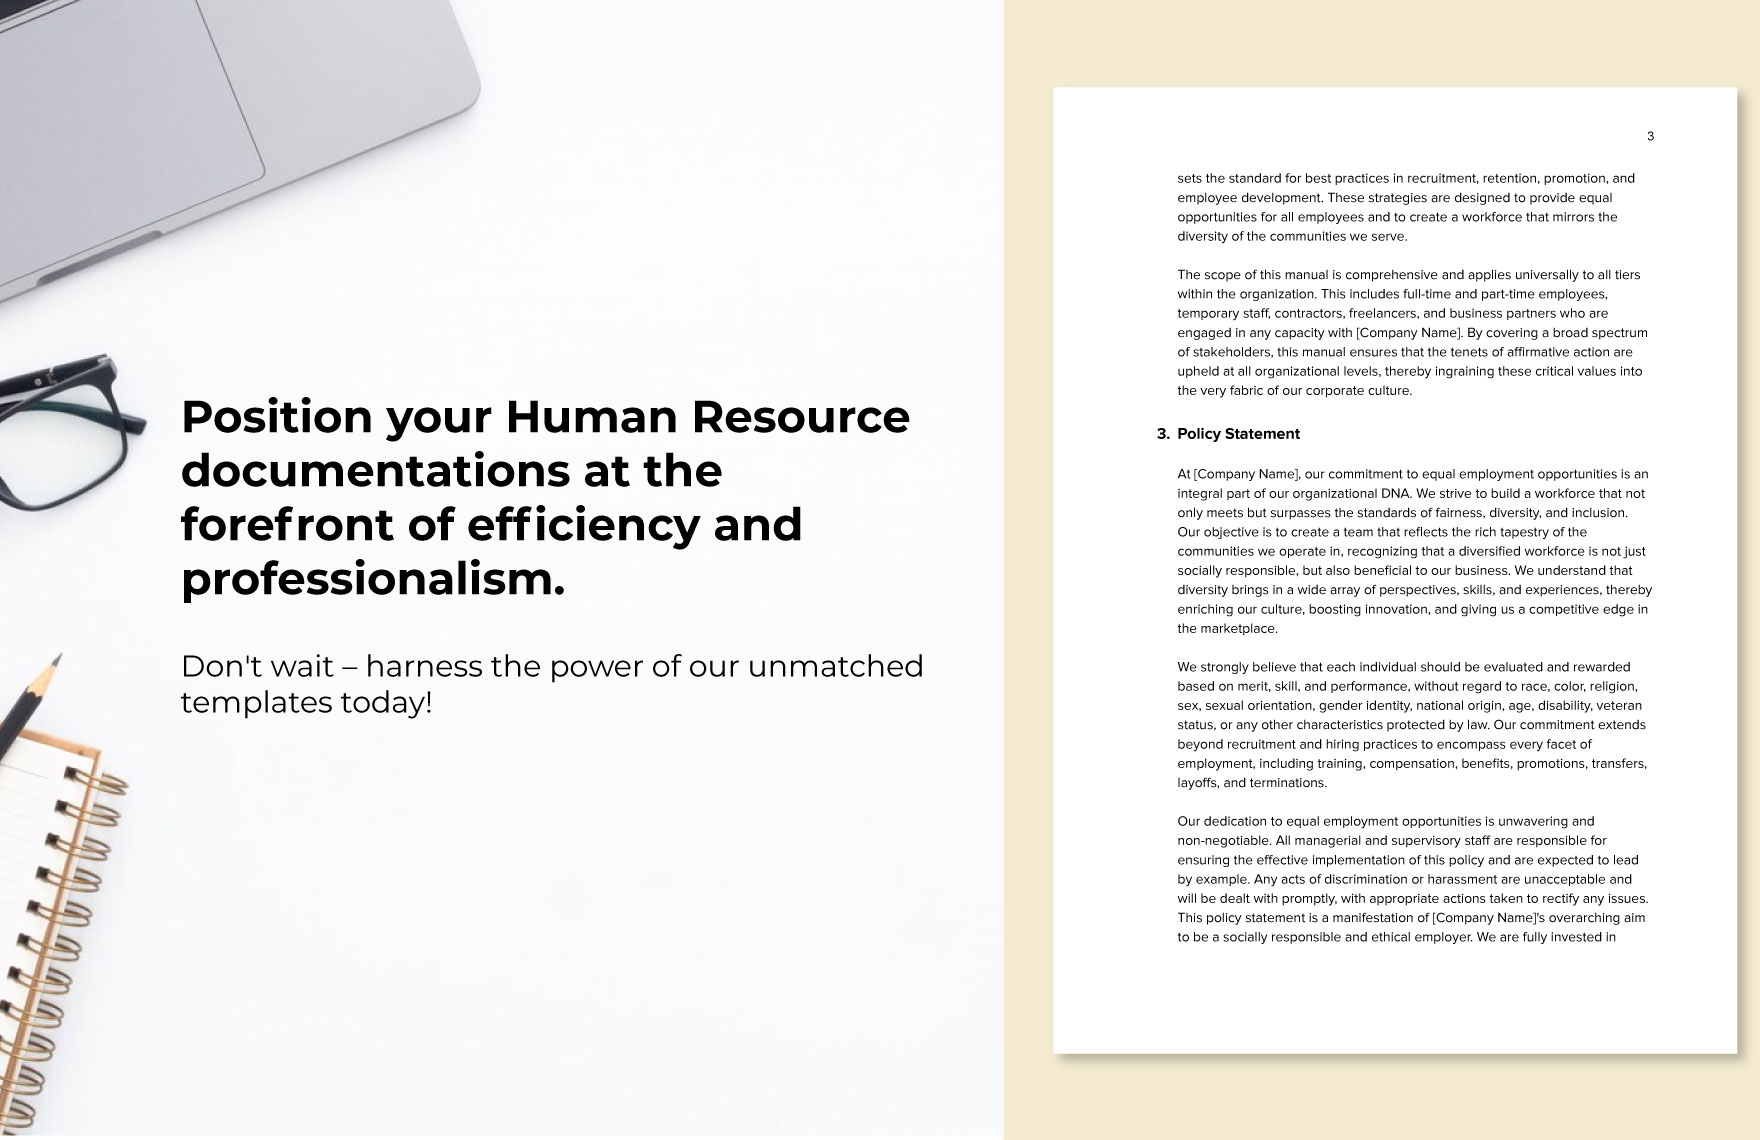 Affirmative Action Compliance Manual HR Template